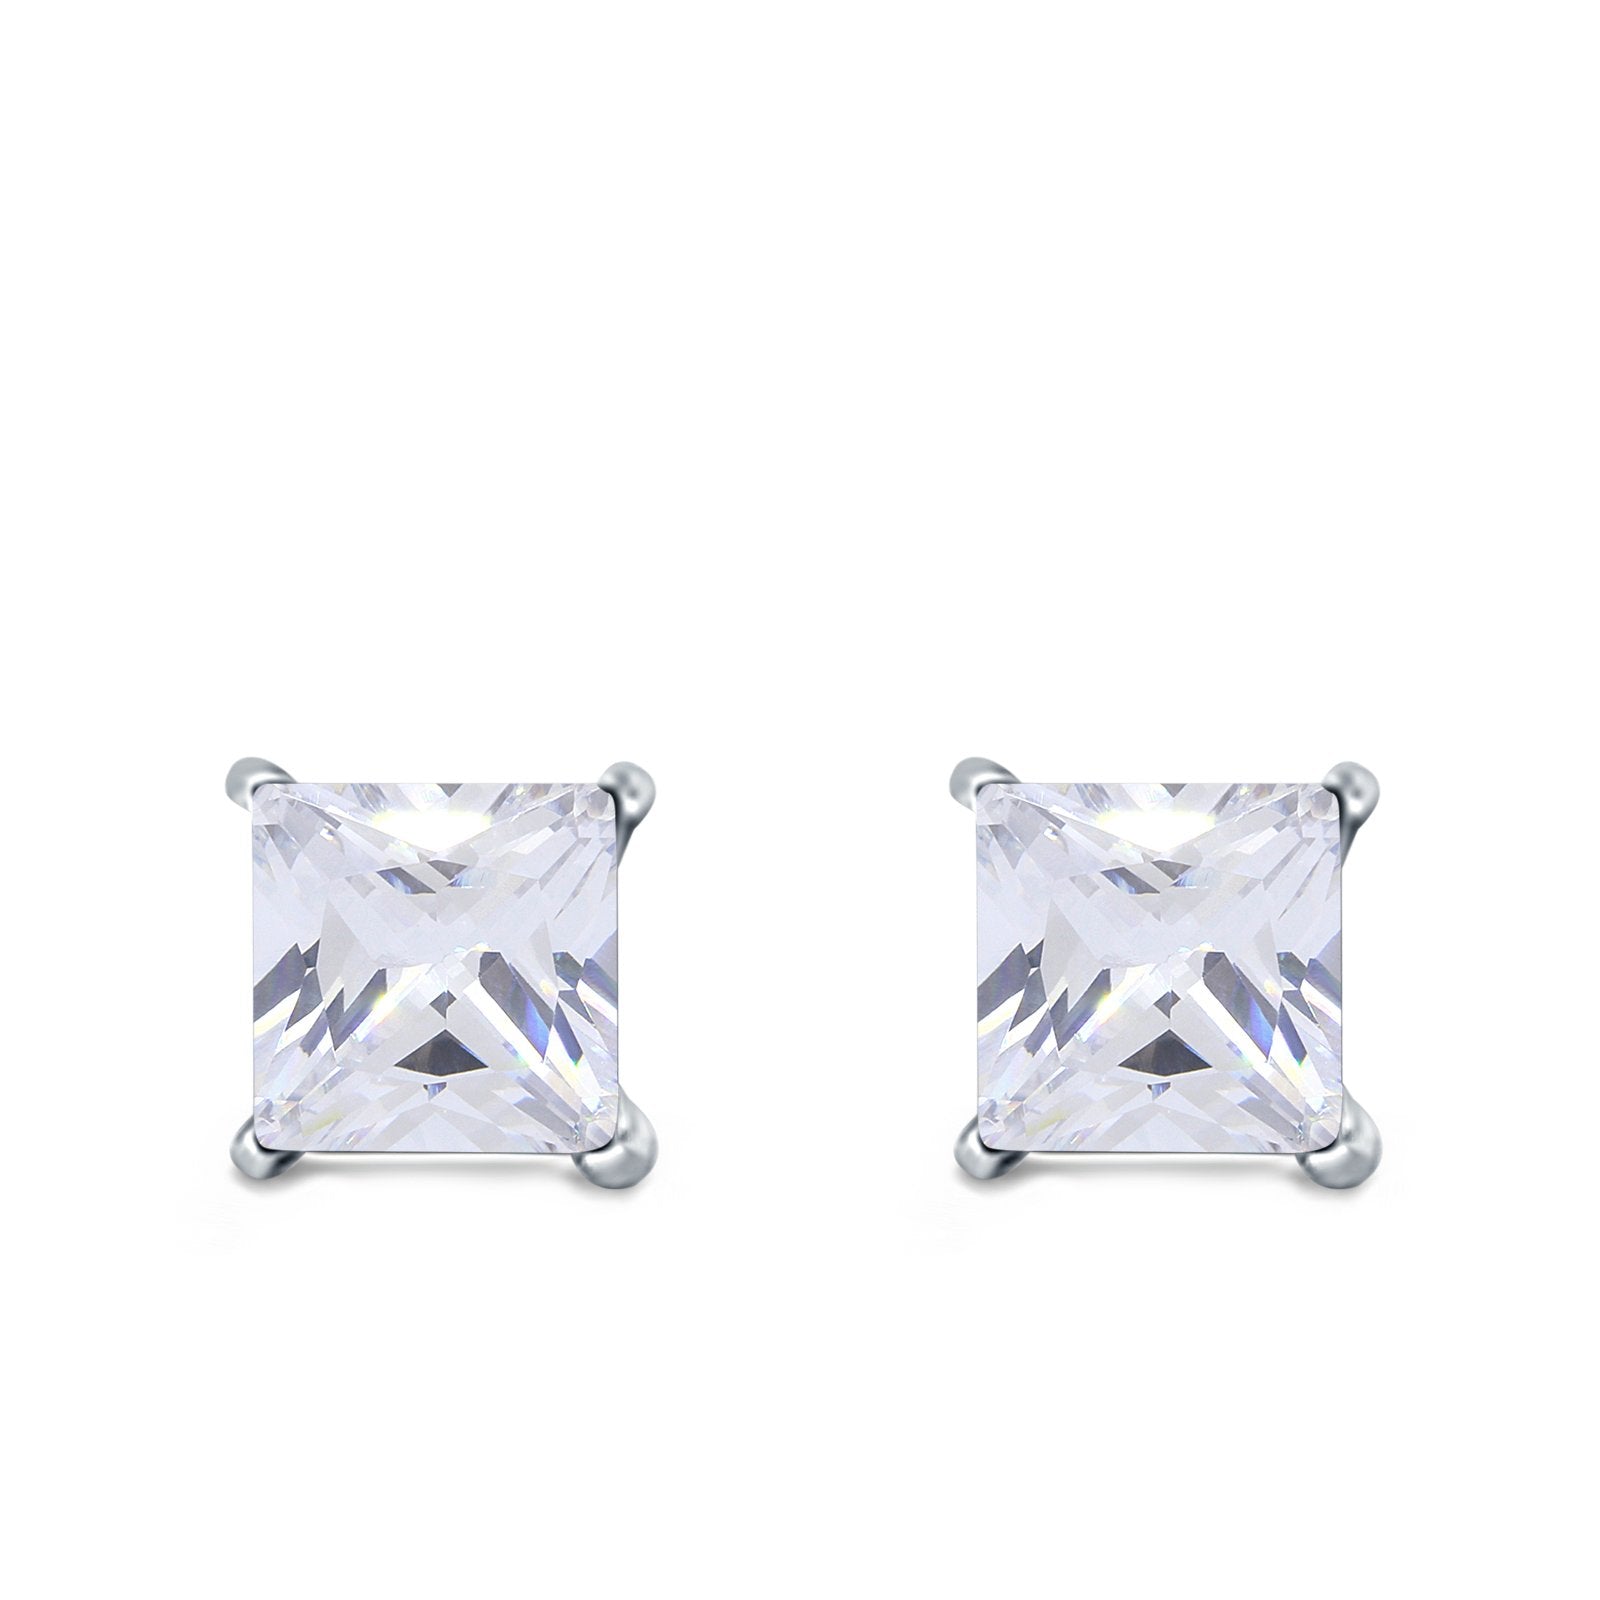 Halo Stud Earrings Princess Cut Simulated Cubic Zirconia 925 Sterling  Silver (4mm-10mm) - Simulated Cubic Zirconia / 4mm